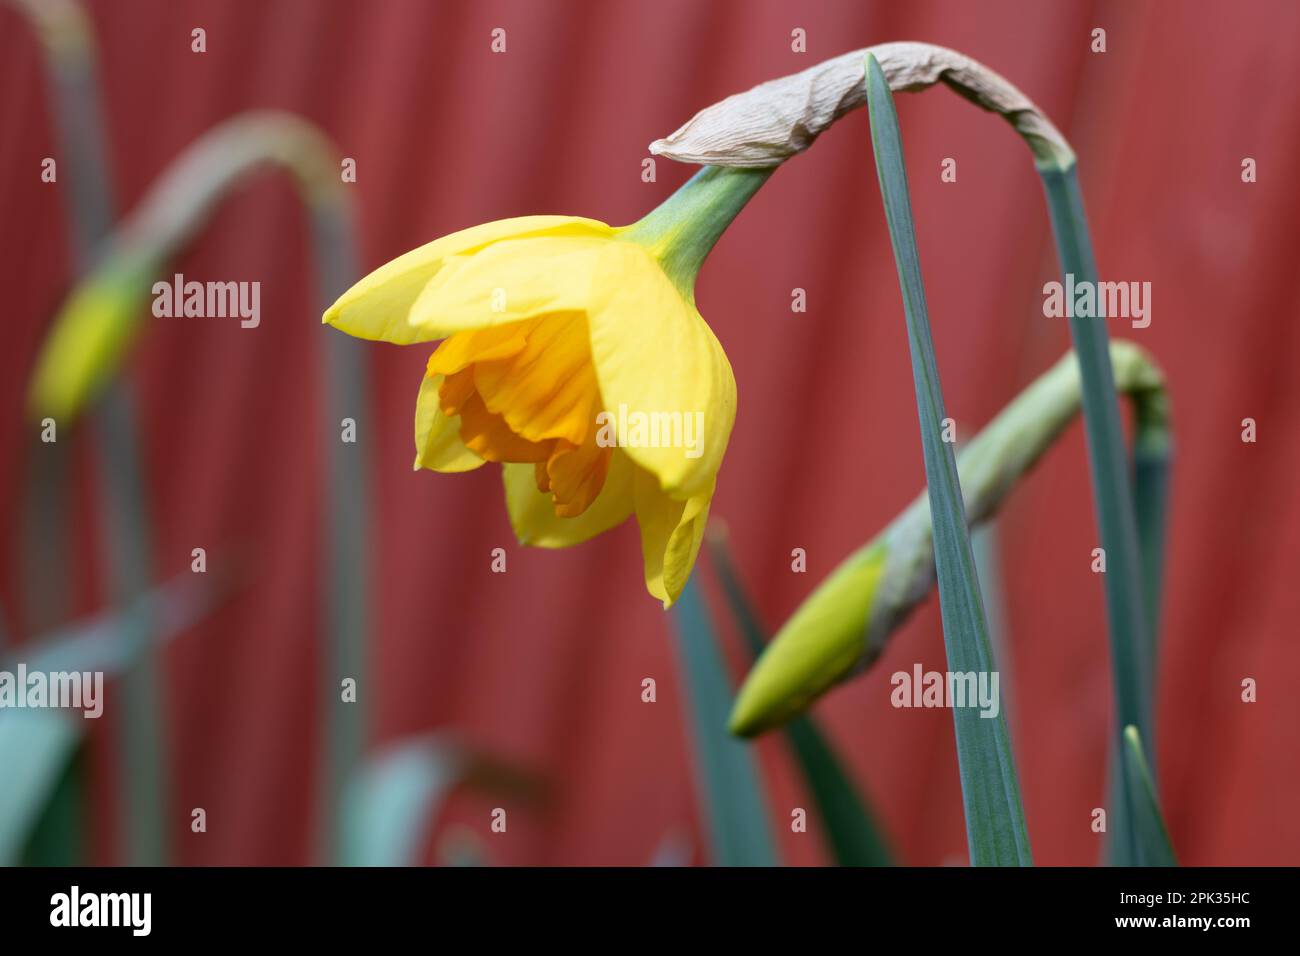 Very early spring yellow narcissus daffodils in garden not quite open semi-closed Stock Photo